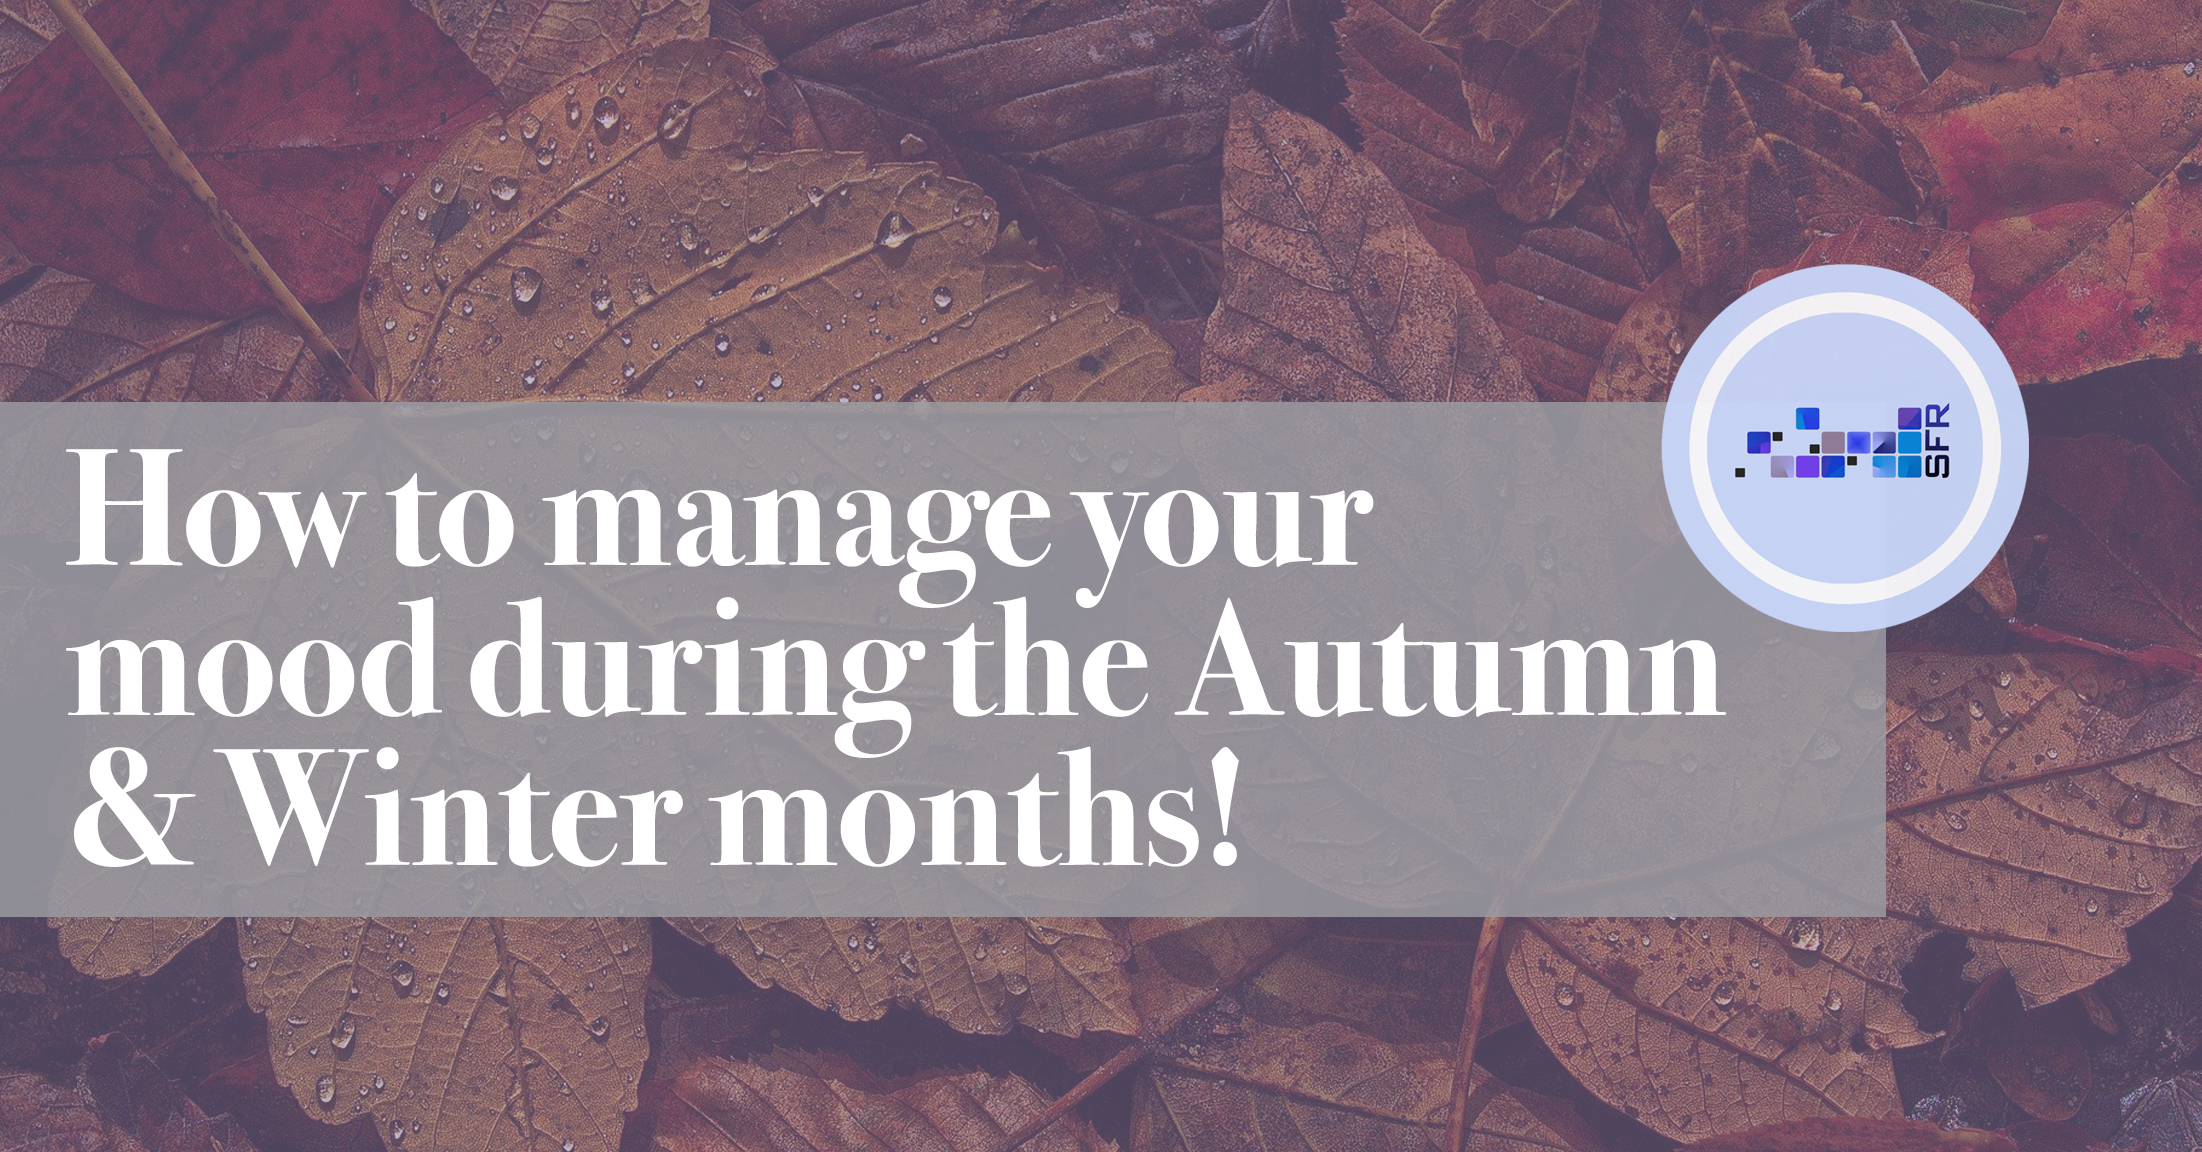 How to manage your mood during the Autumn and Winter Months